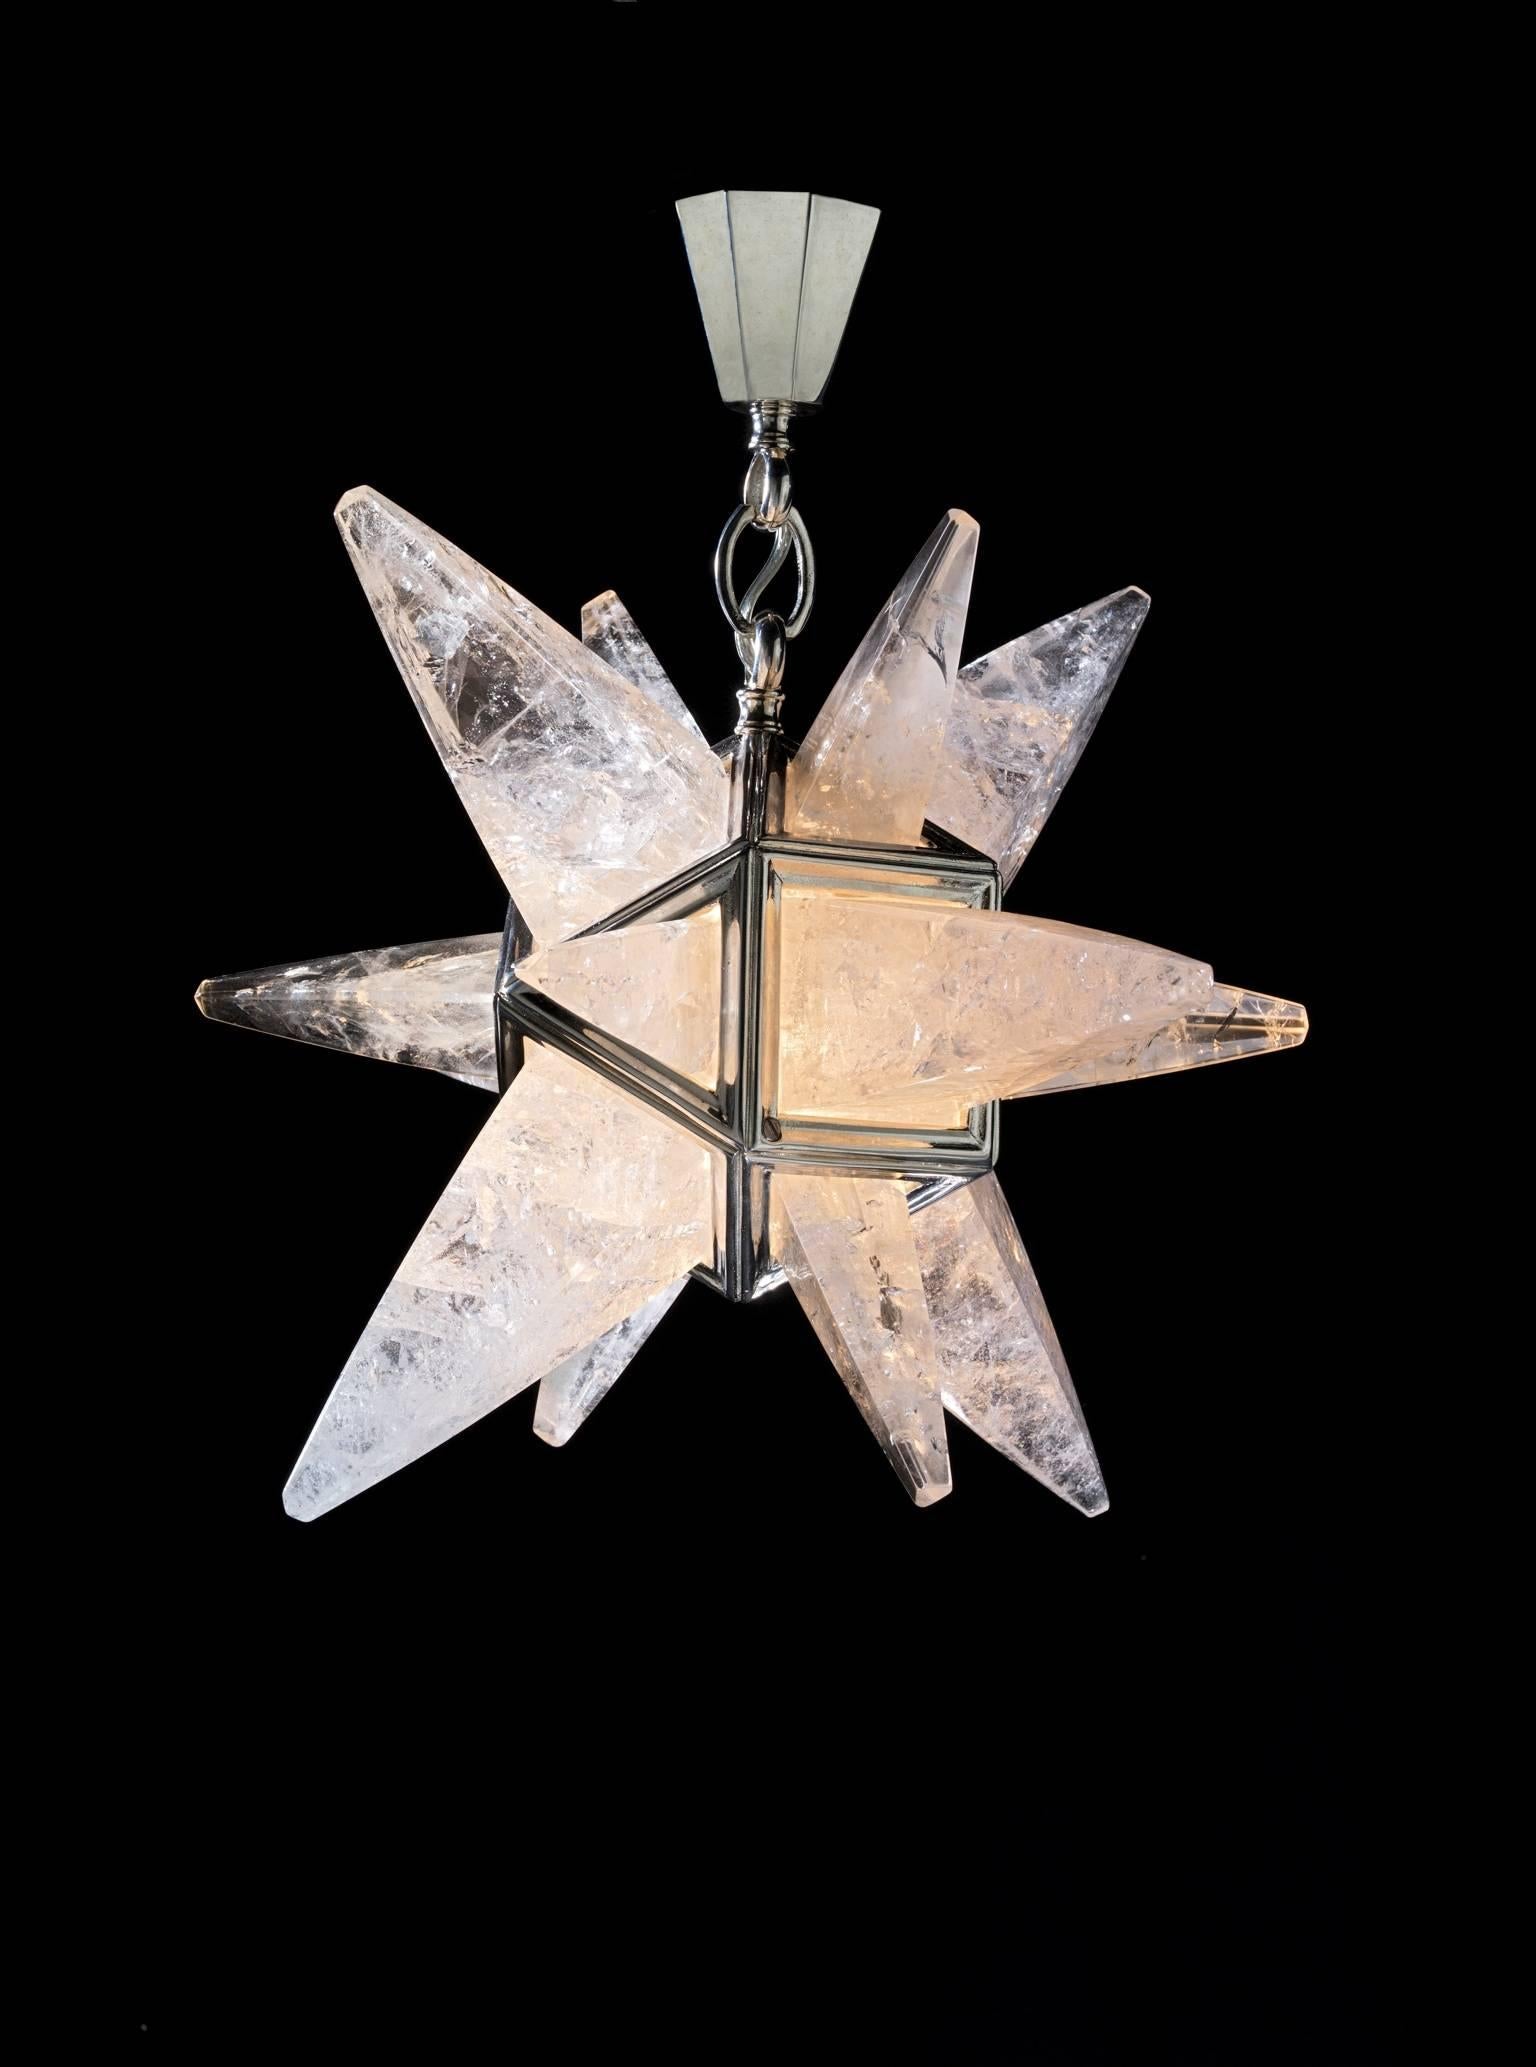 Rock crystal star light II silver edition. Model design by Alexandre Vossion. This rock crystal star quartz lighting is made in France. The fixture, the chain and the canopy of this rock crystal lighting are handmade in bronze. Each workers who